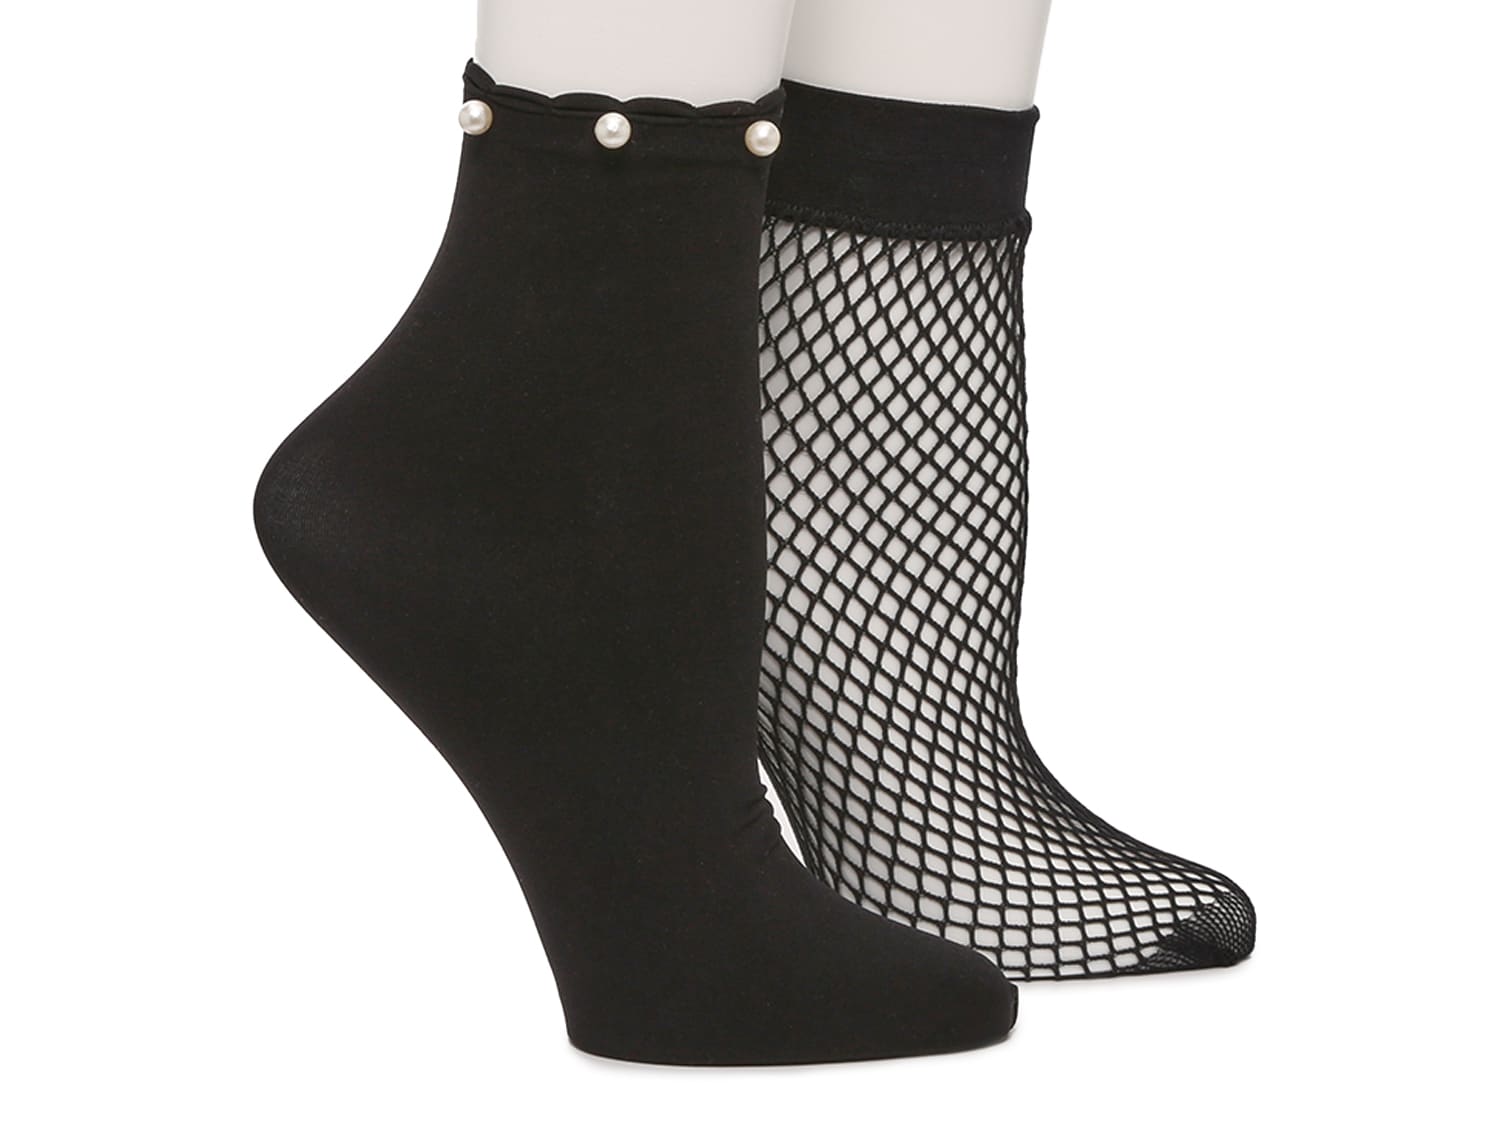 Mix No. 6 Fishnet Pearl Women's Ankle Socks - 2 Pack